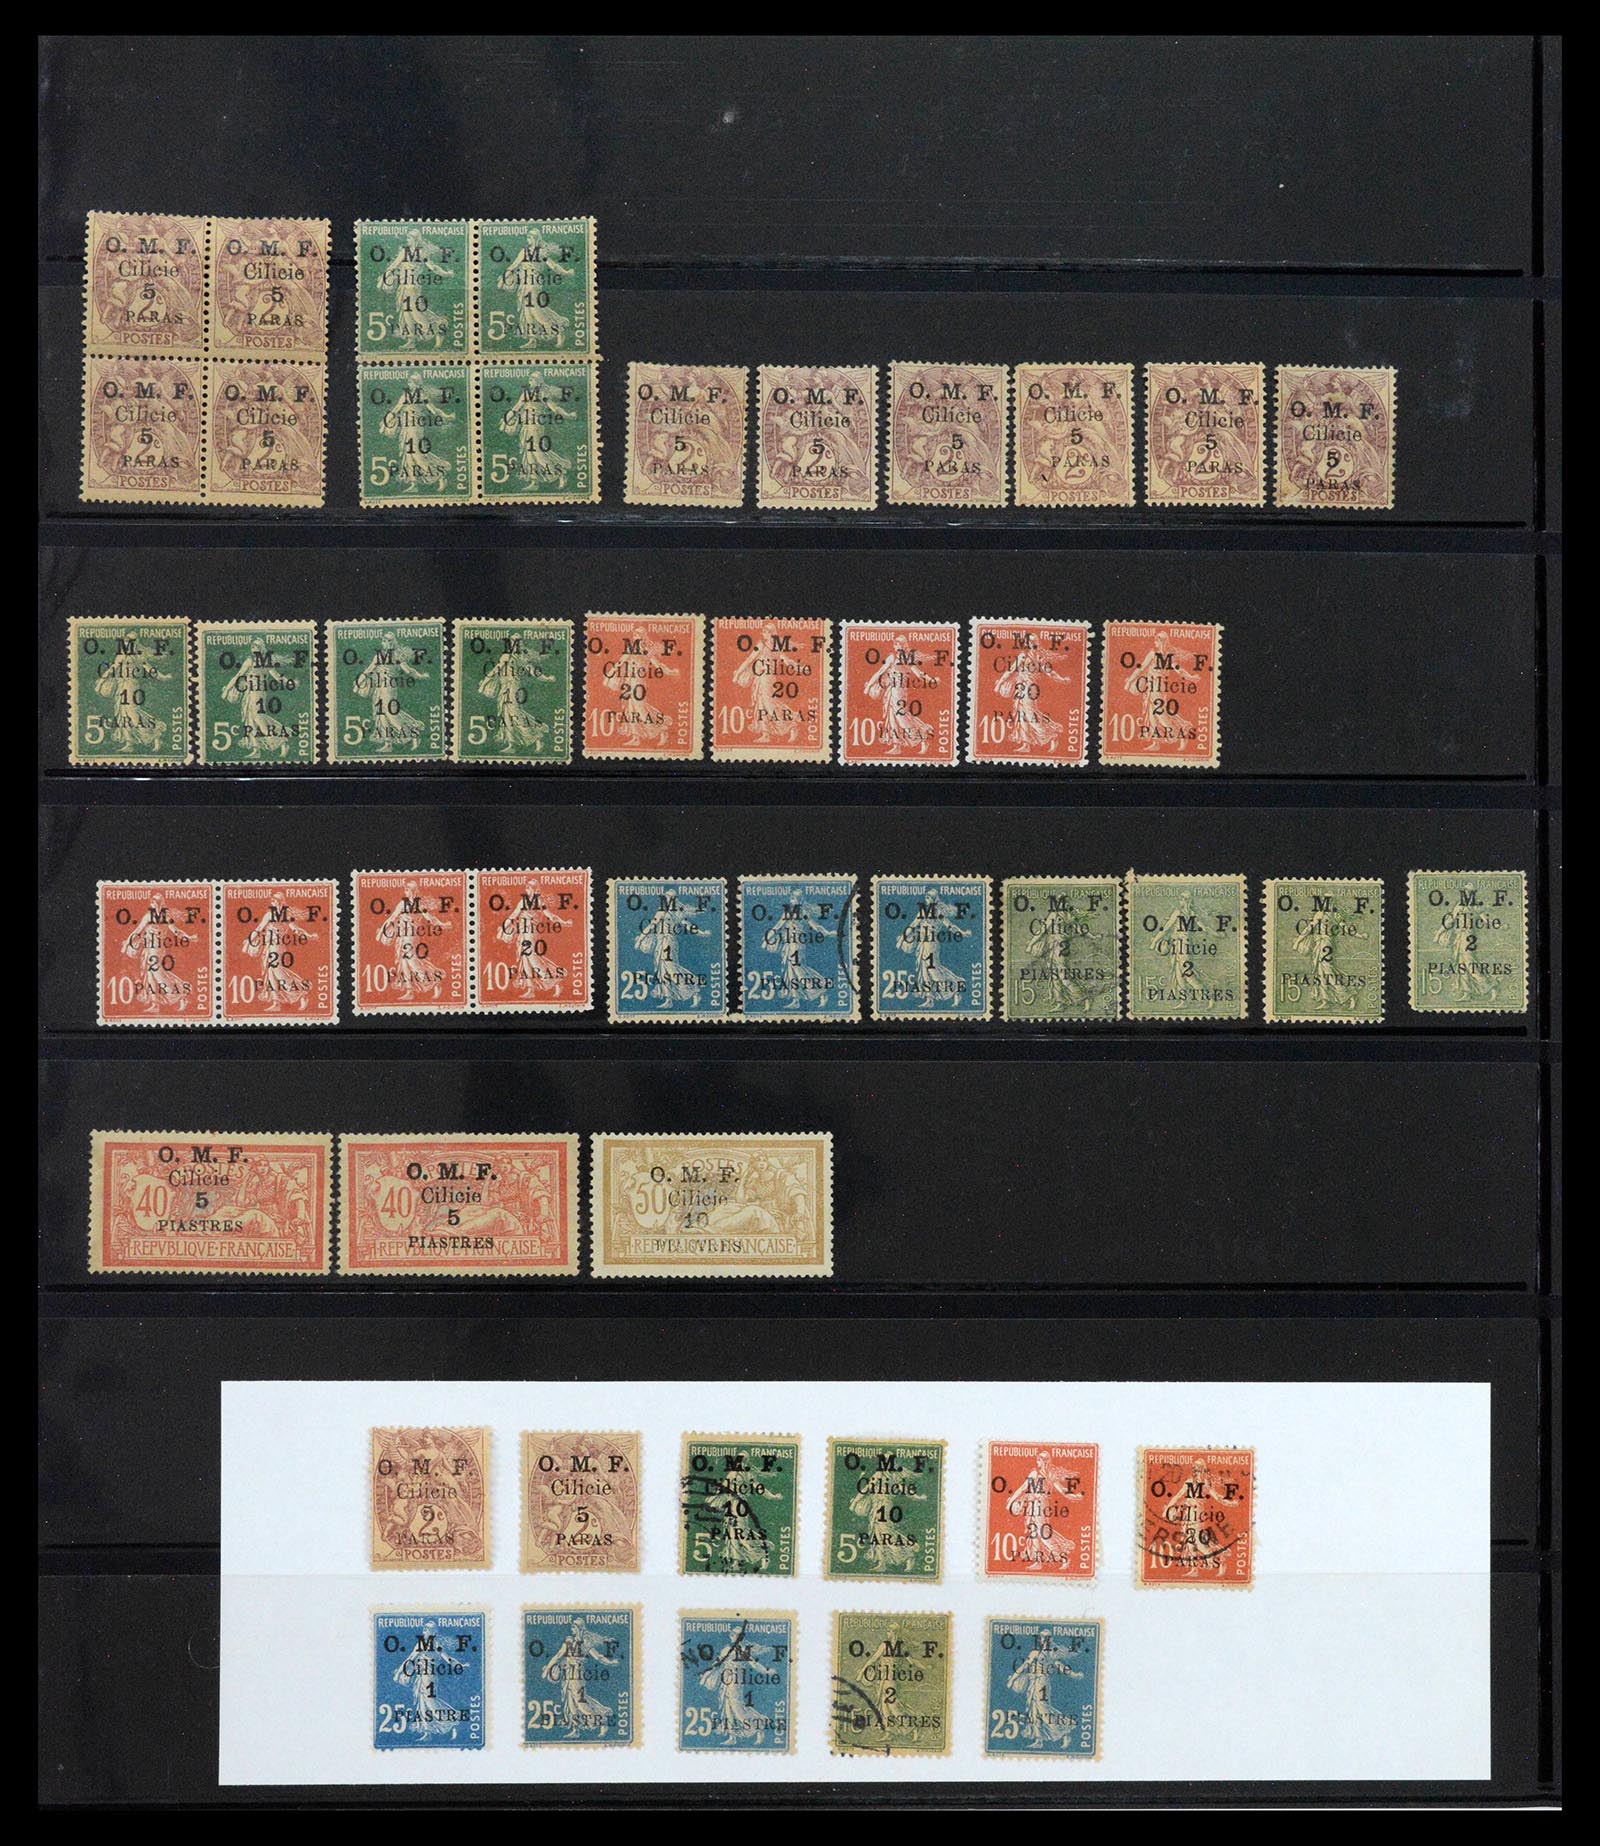 39457 0015 - Stamp collection 39457 Cilicia 1919-1921.